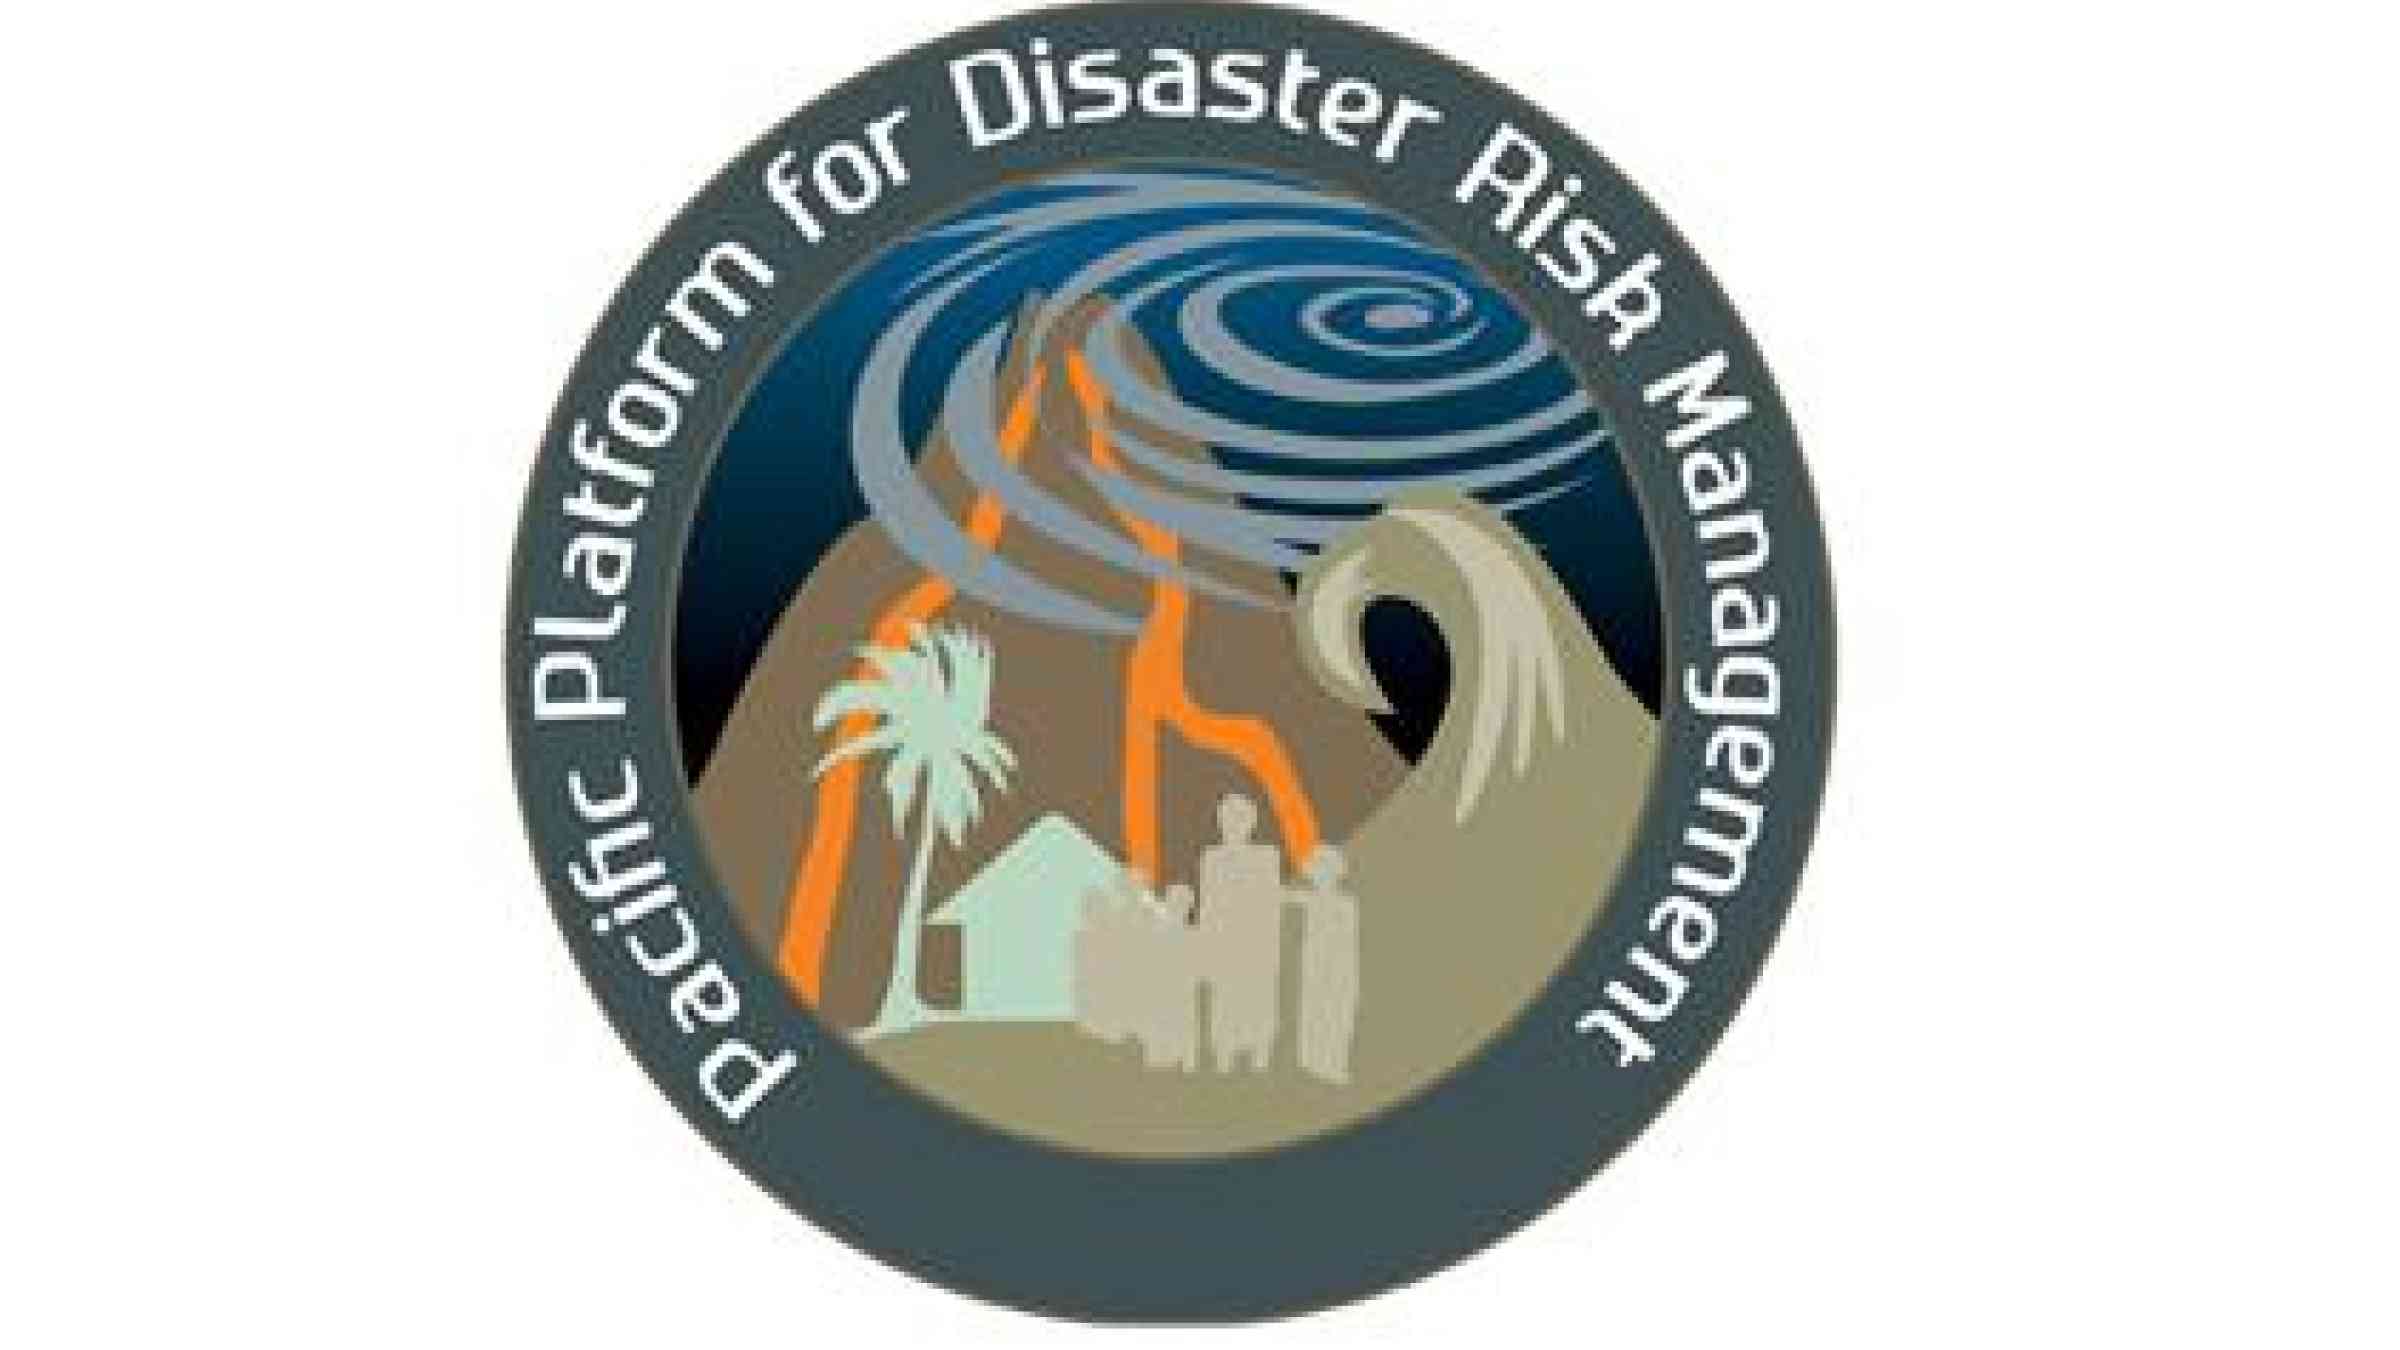 The 2014 meeting of the Pacific Platform for Disaster Risk Management held on 02-04 June in Suva, Fiji serves as an important venue for receiving valuable Pacific stakeholder inputs to the post-2015 framework for DRR. (Photo: UNISDR)